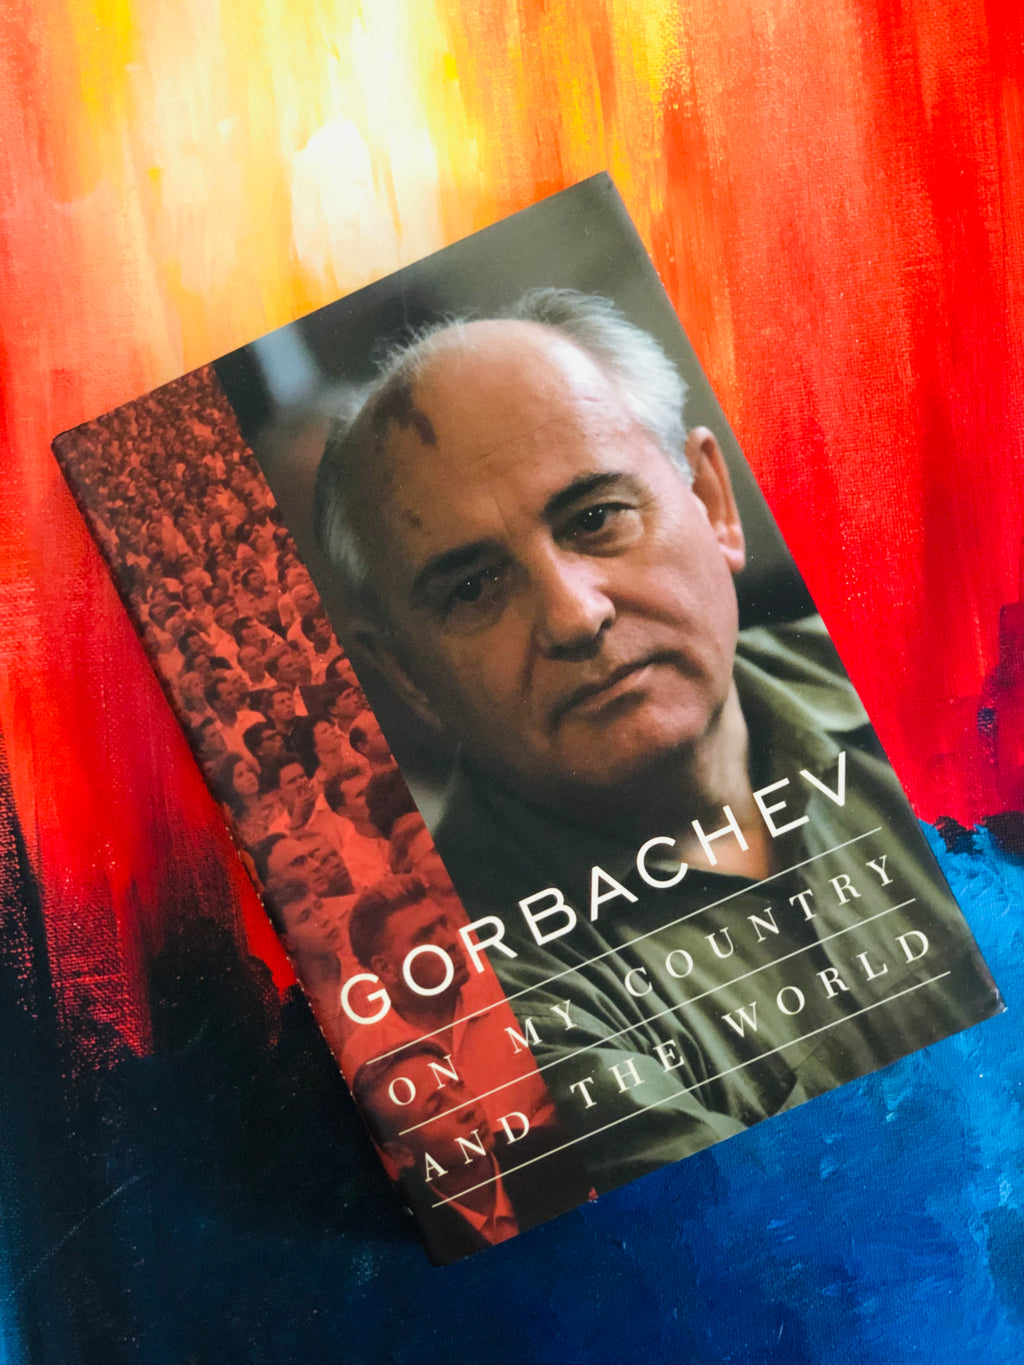 On My Country And The World- By Gorbachev